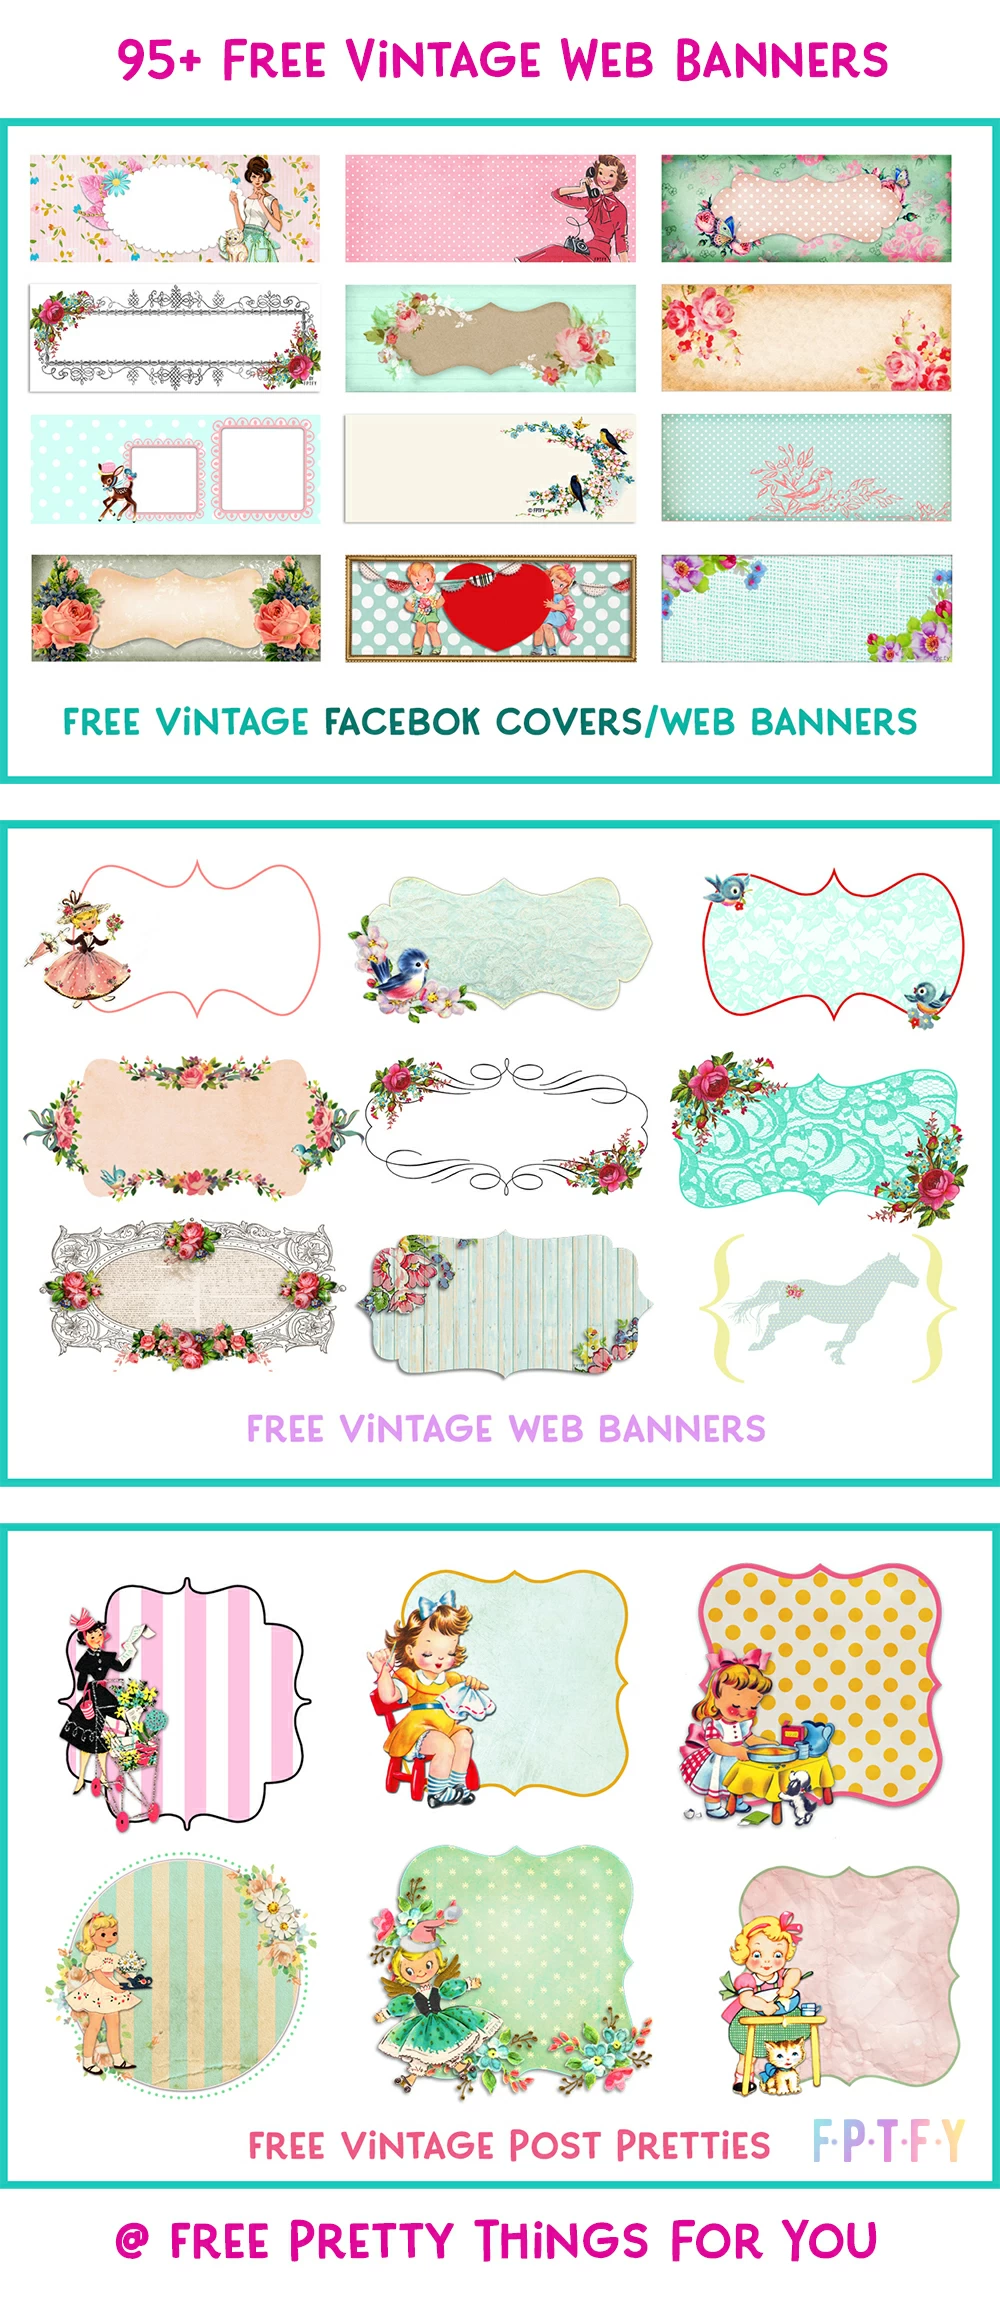 95+ Facebook covers vintage web banners